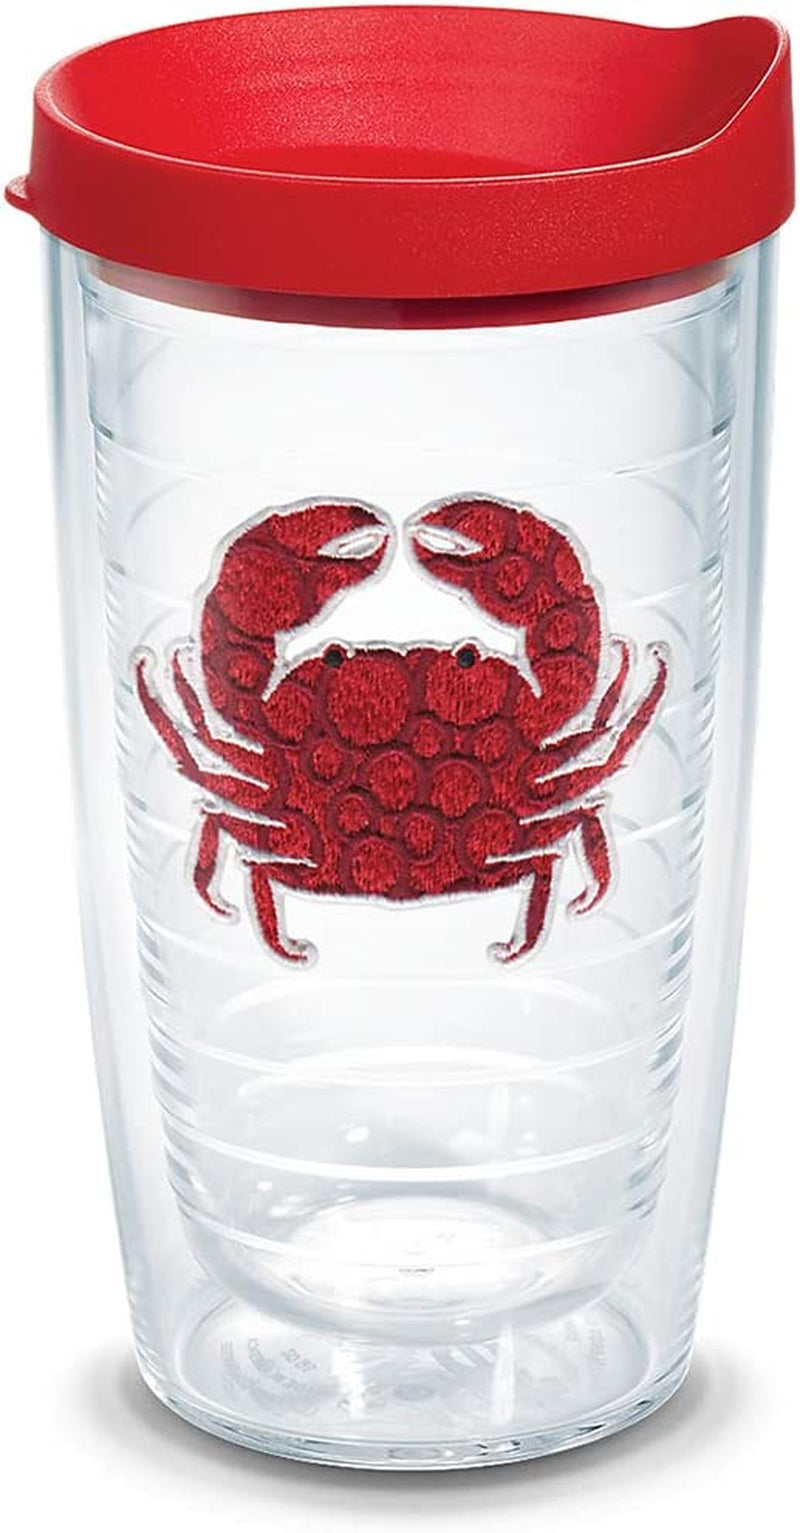 Tervis Crab Insulated Tumbler with Emblem and Red Lid, 16 Oz, Clear Home & Garden > Kitchen & Dining > Tableware > Drinkware Tervis Red Lid 16oz 